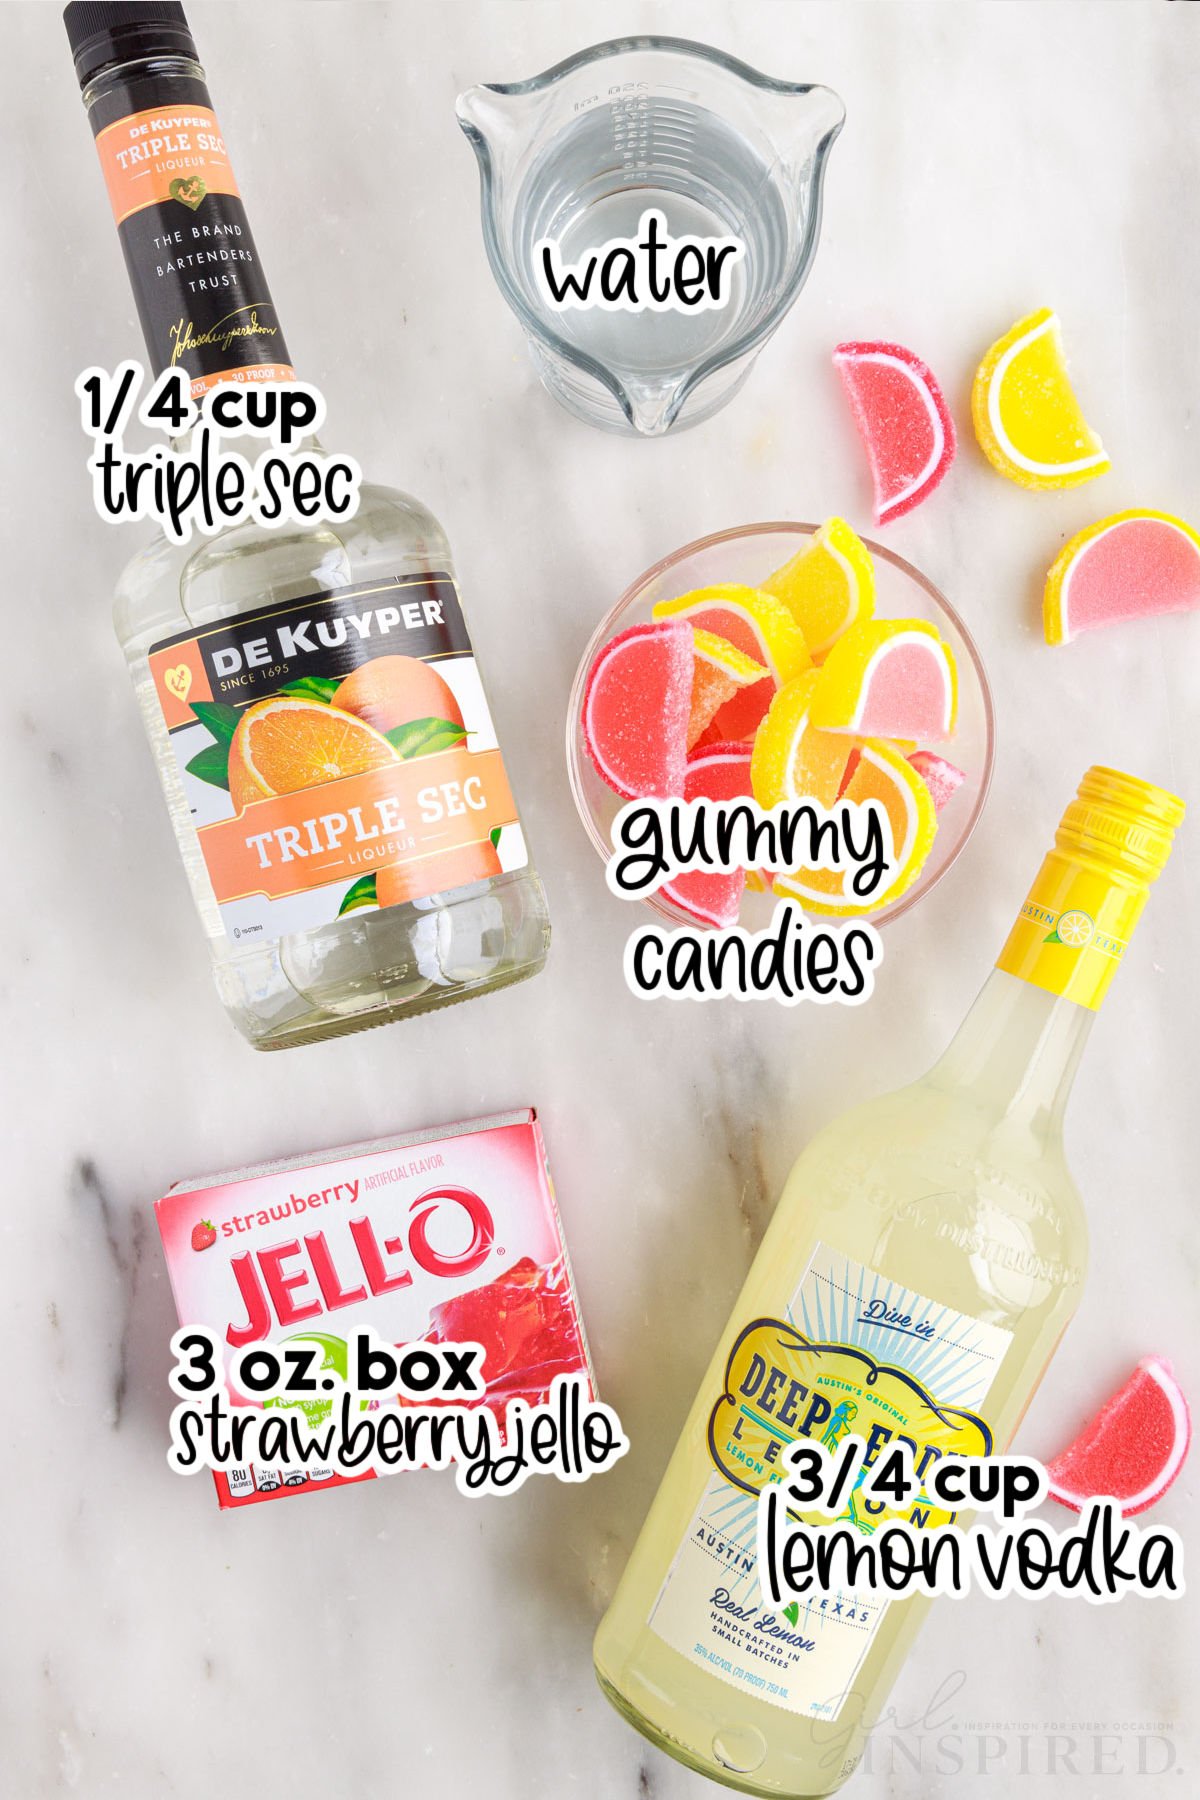 Individual ingredients for pink lemonade jello shots: strawberry jello, triple sec, cup of water, bowl of gummy candies, and lemon vodka with text labels.